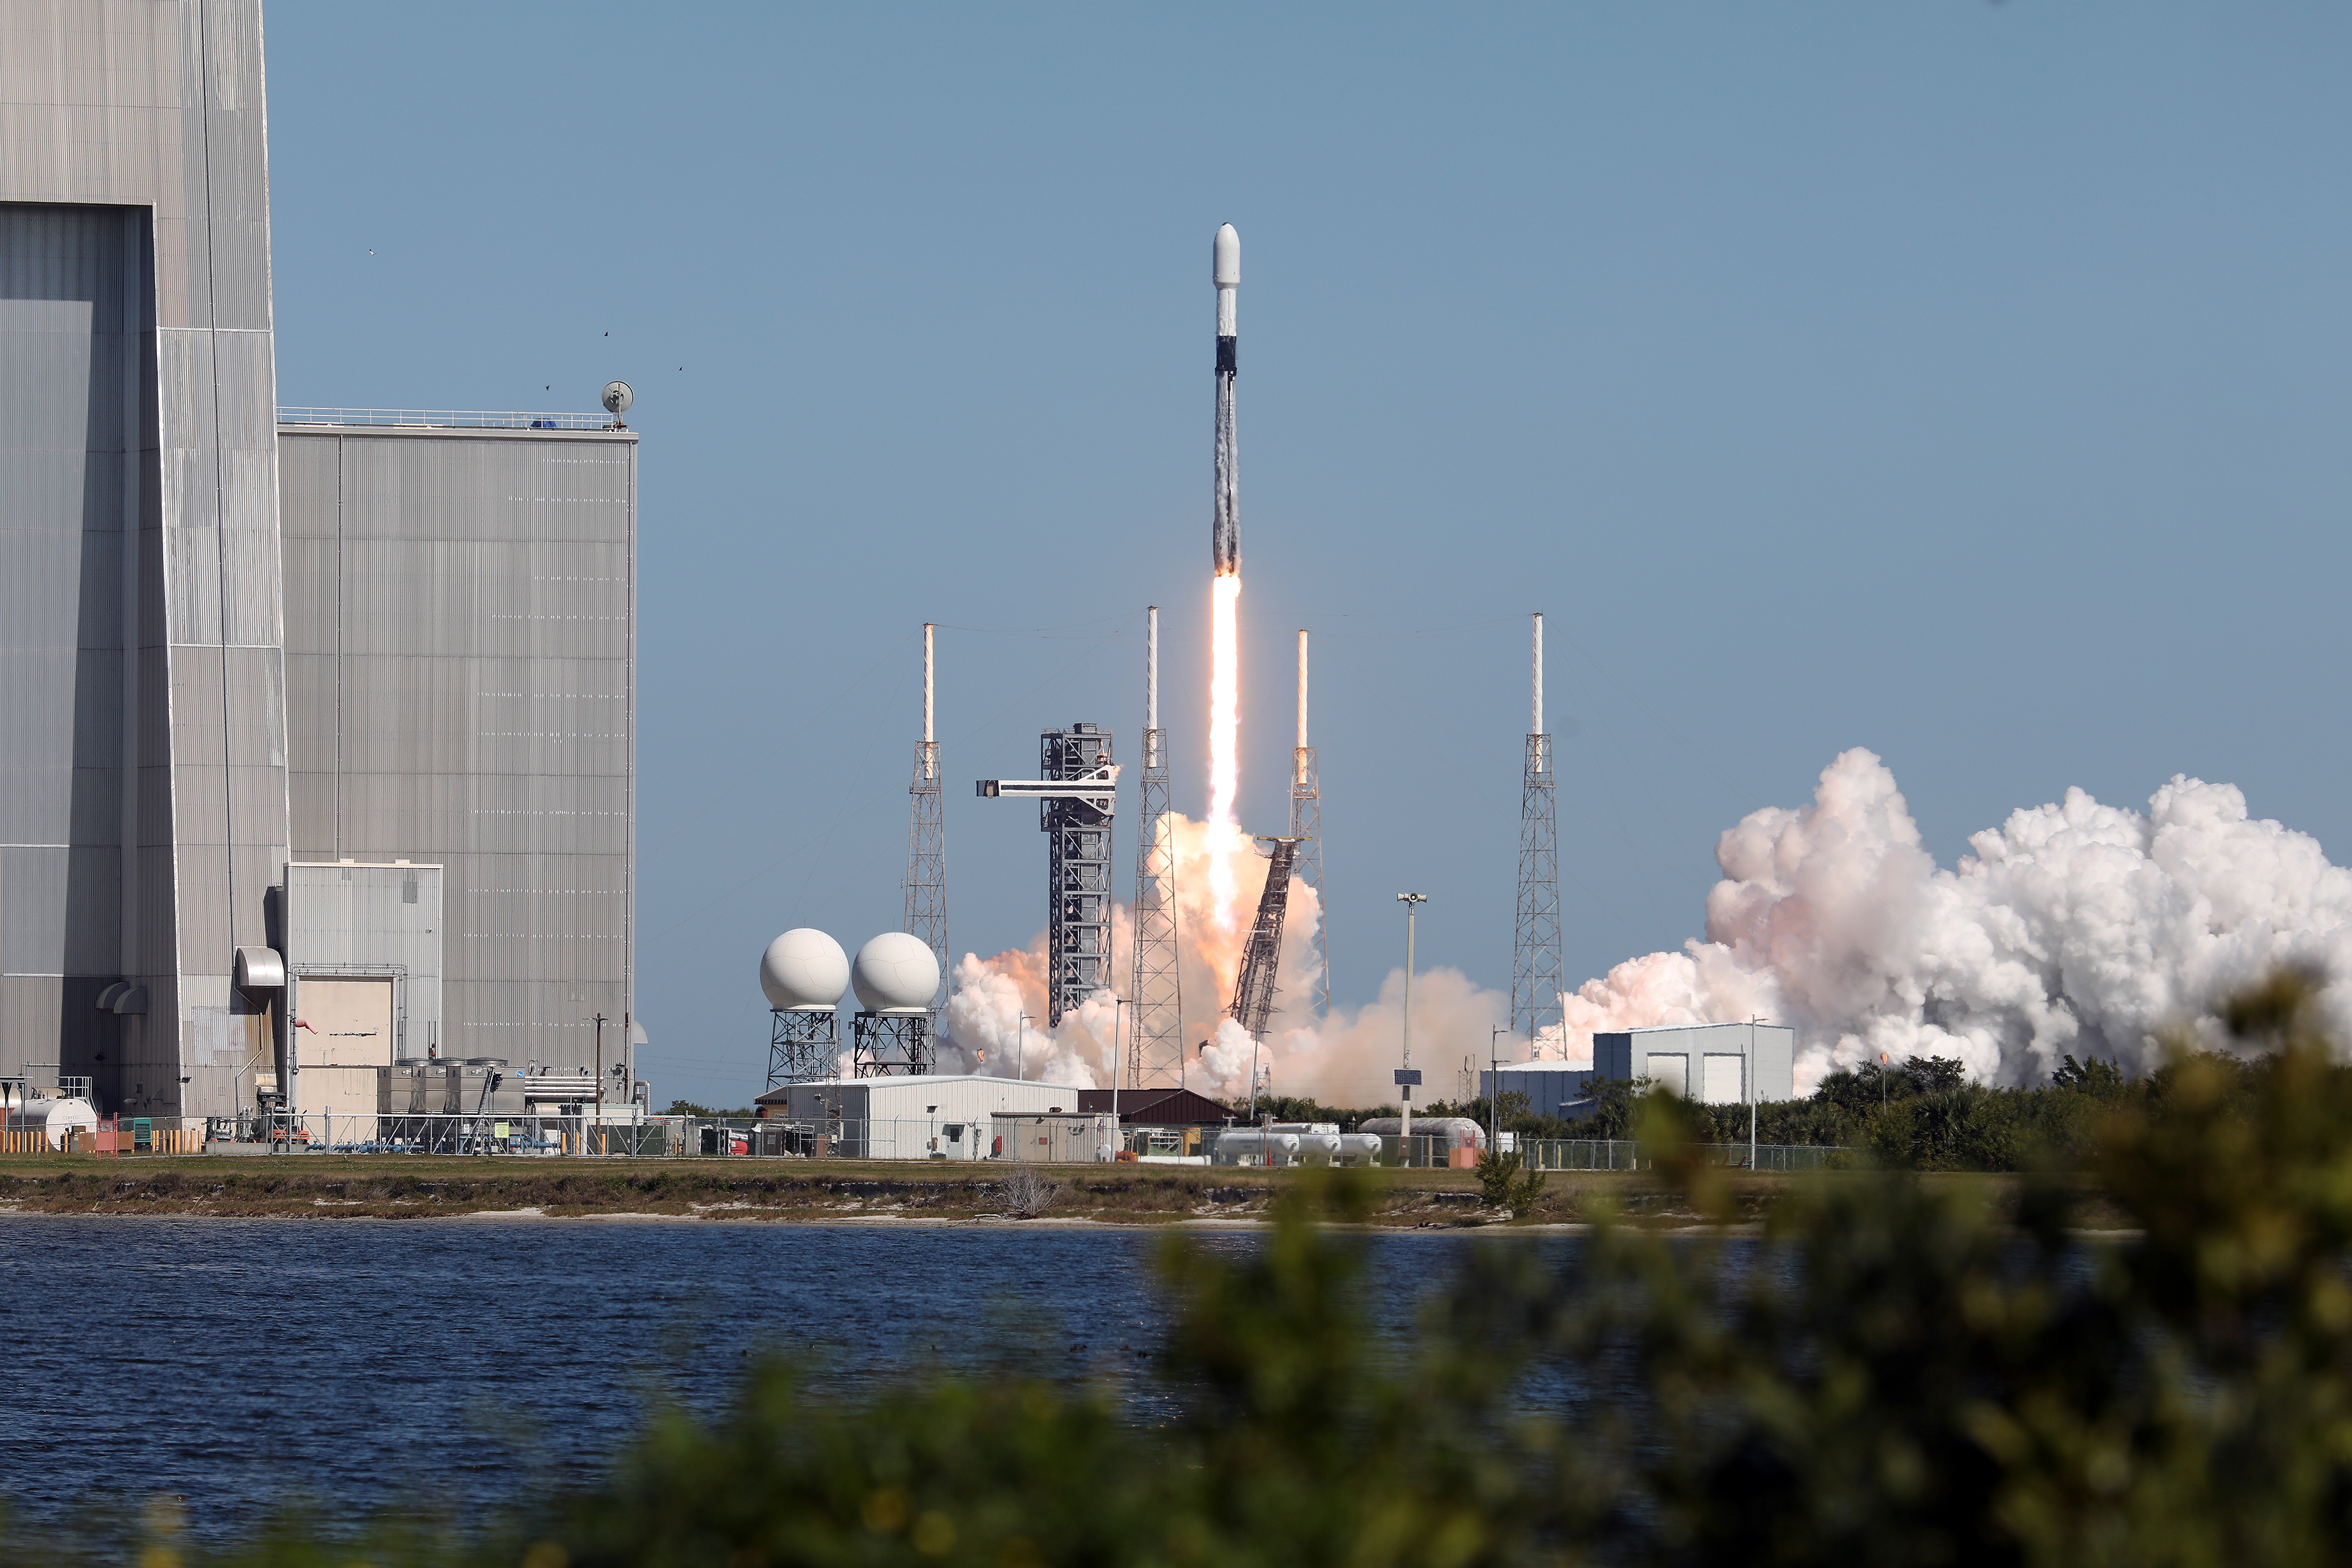 Northrop Grumman's 20th Cargo Resupply Mission Successfully Launches to the International Space Station for NASA